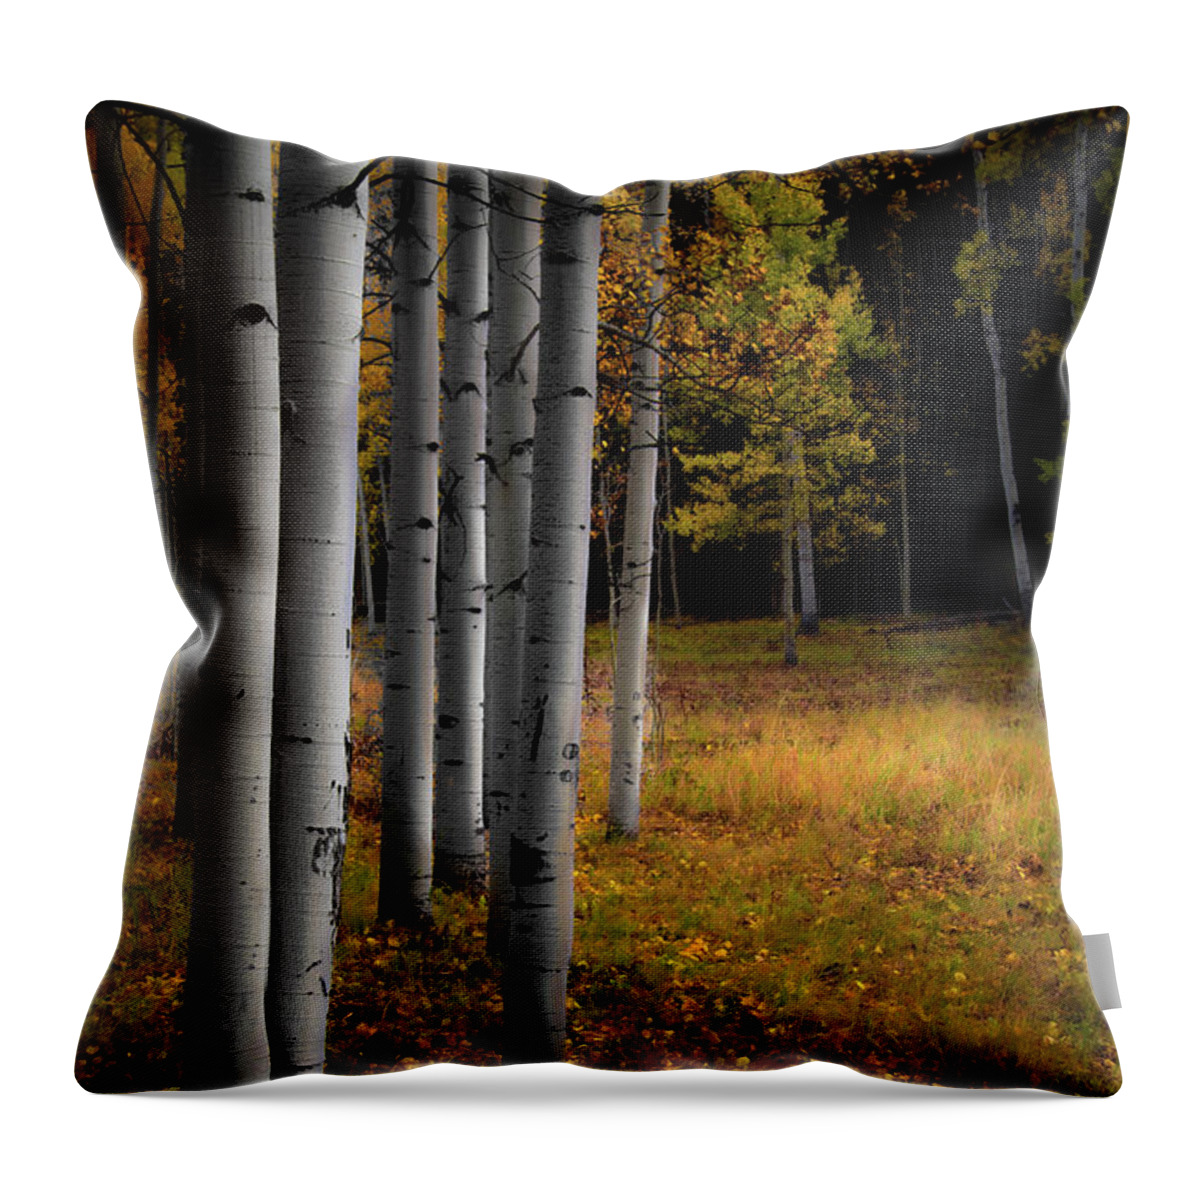 Fall Aspen Trees Throw Pillow featuring the photograph Meadow Walk by The Forests Edge Photography - Diane Sandoval